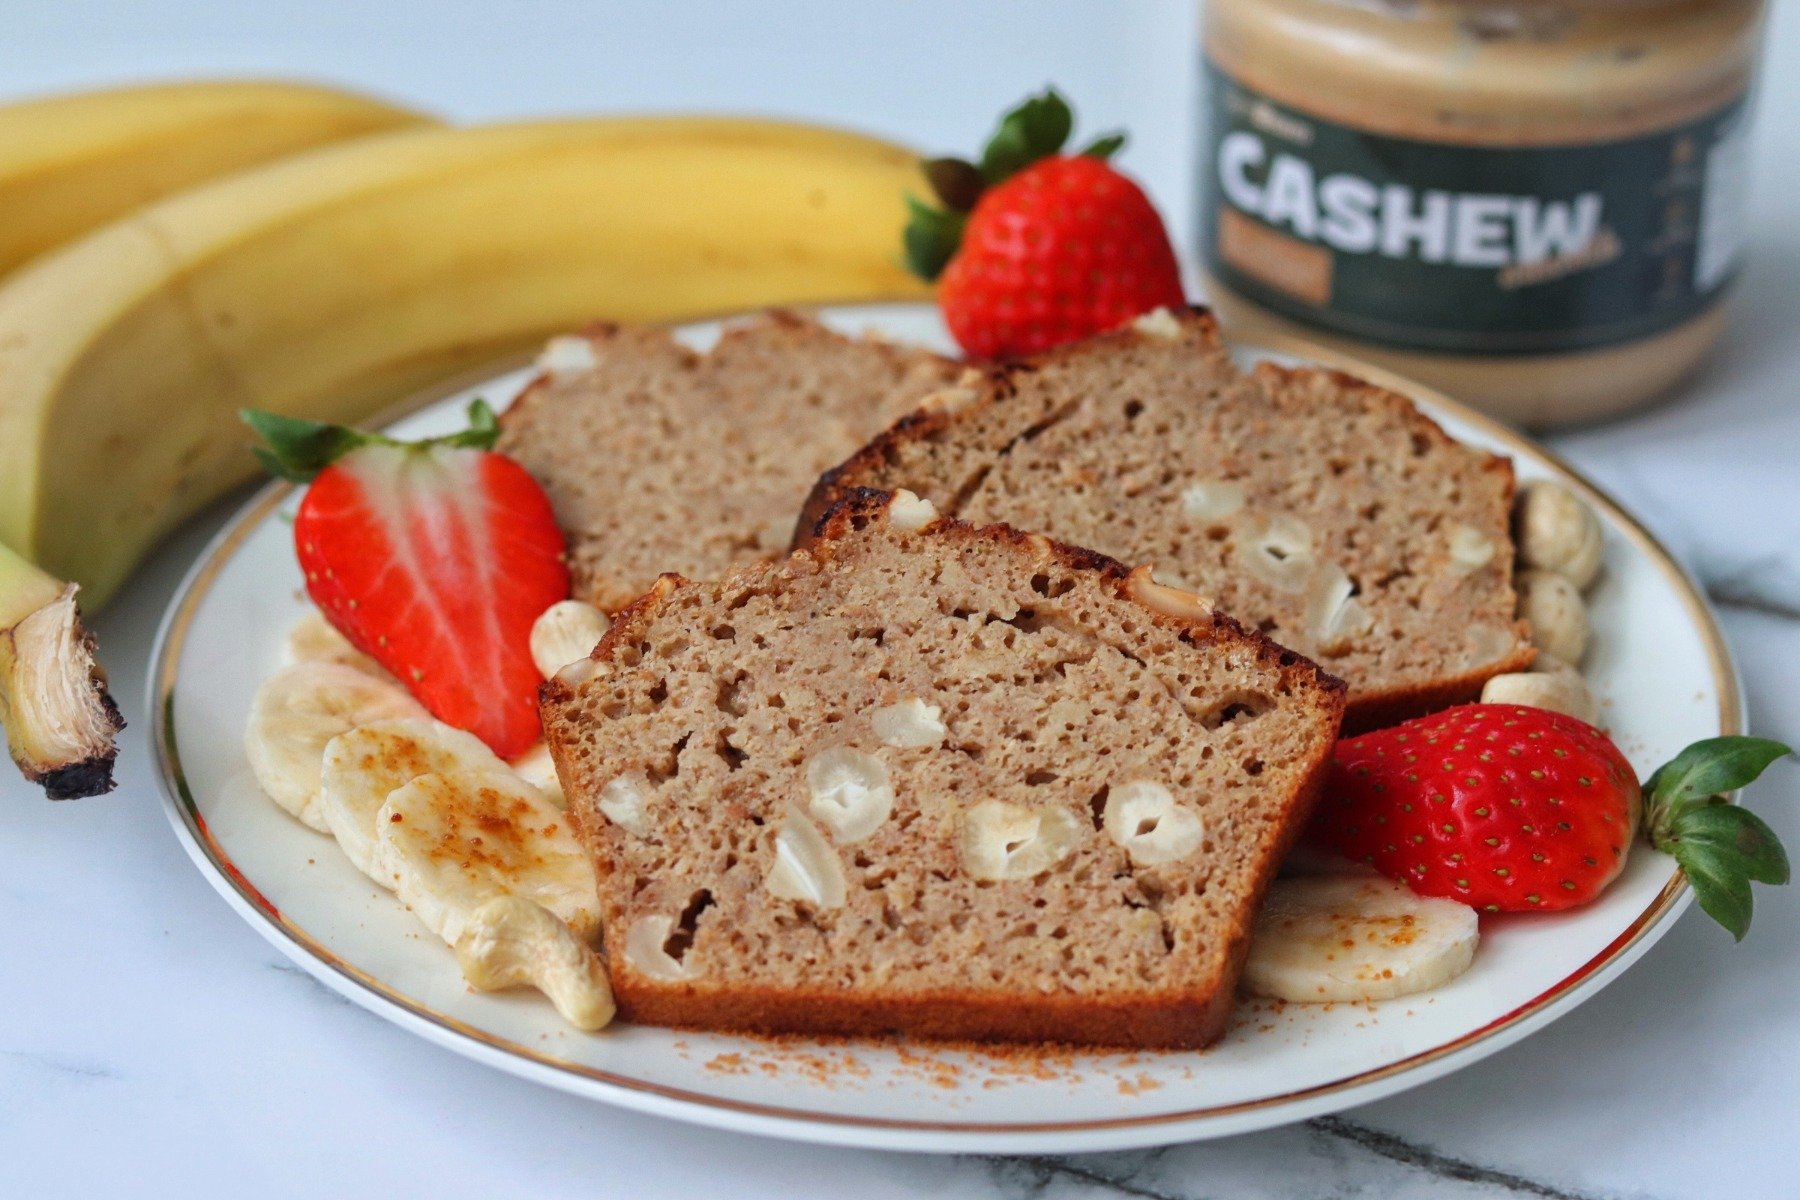 Banana bread with cashew nuts